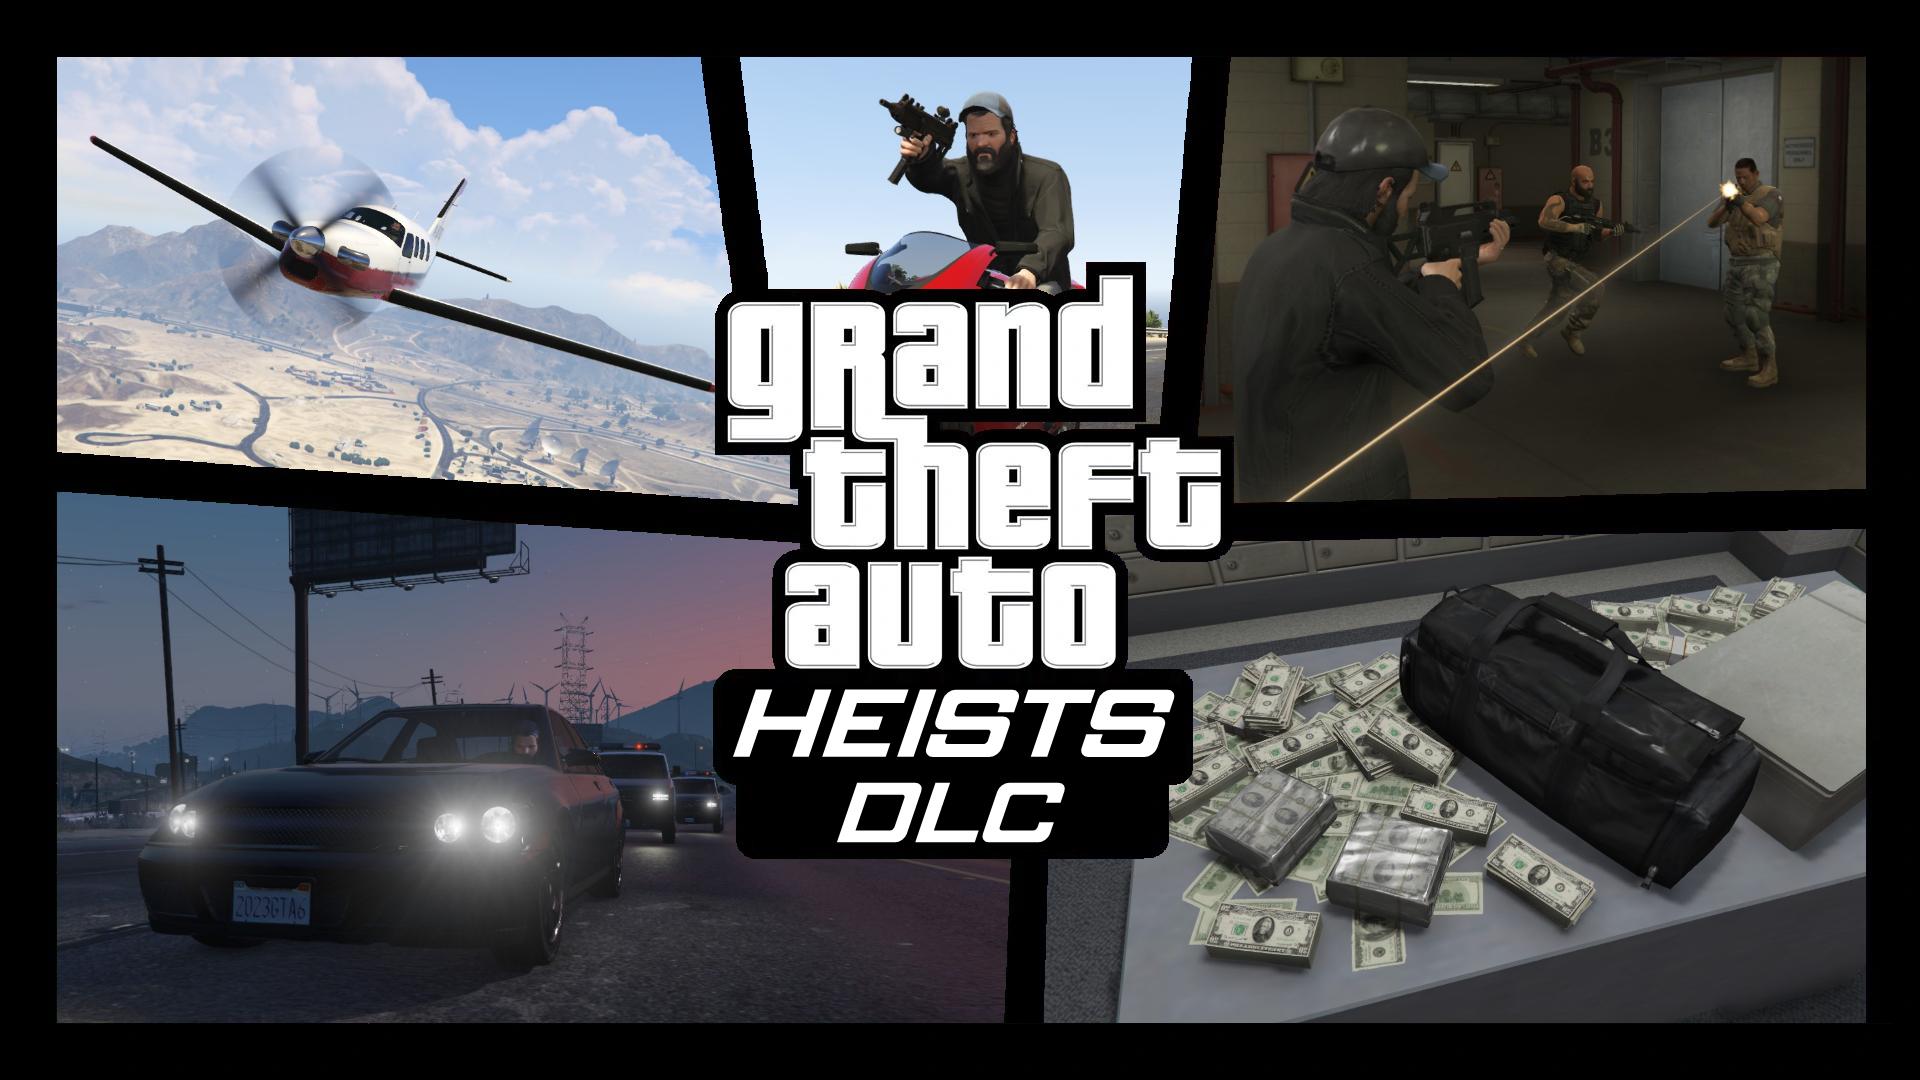 How to install The Payday Single Player Heist Mod 3.0 (2020) GTA 5 MODS